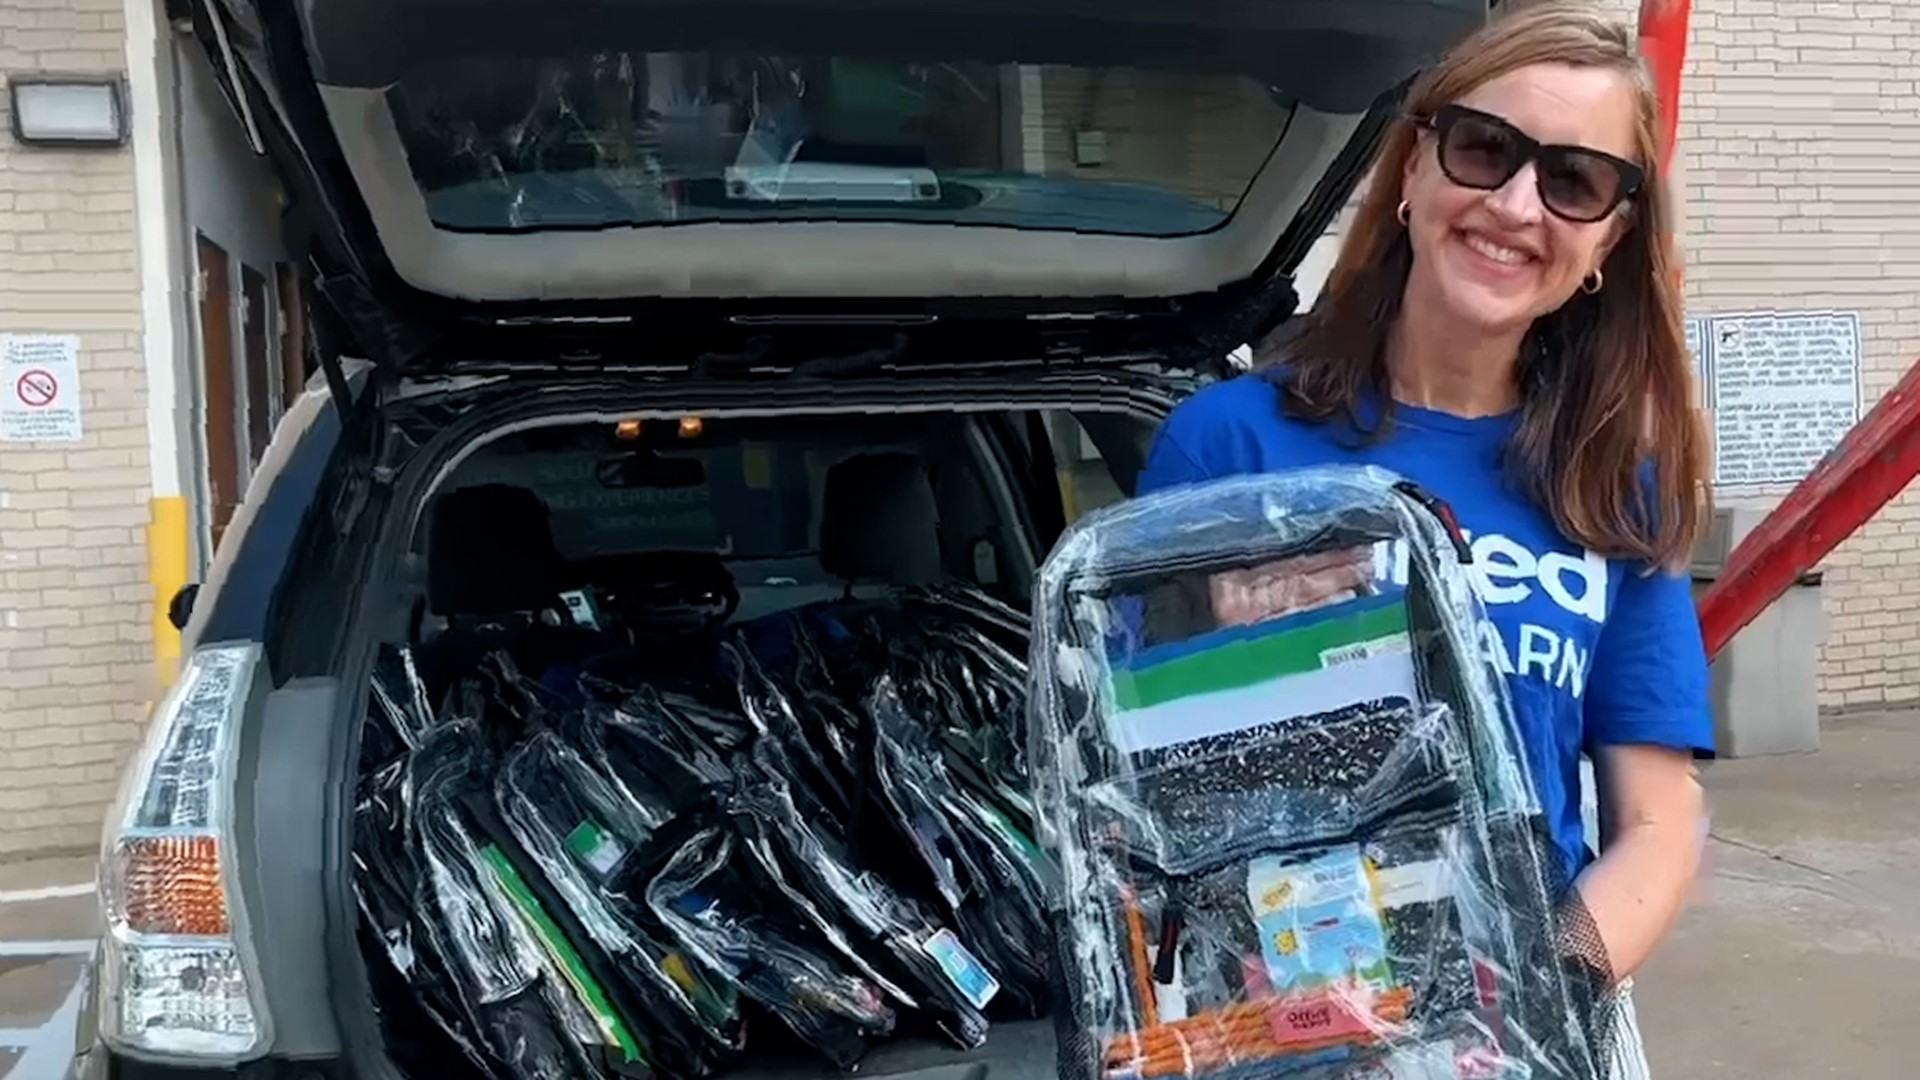 WFAA proudly partnered with United to Learn, a Dallas-based non-profit education organization, to identify five schools to receive free backpacks.